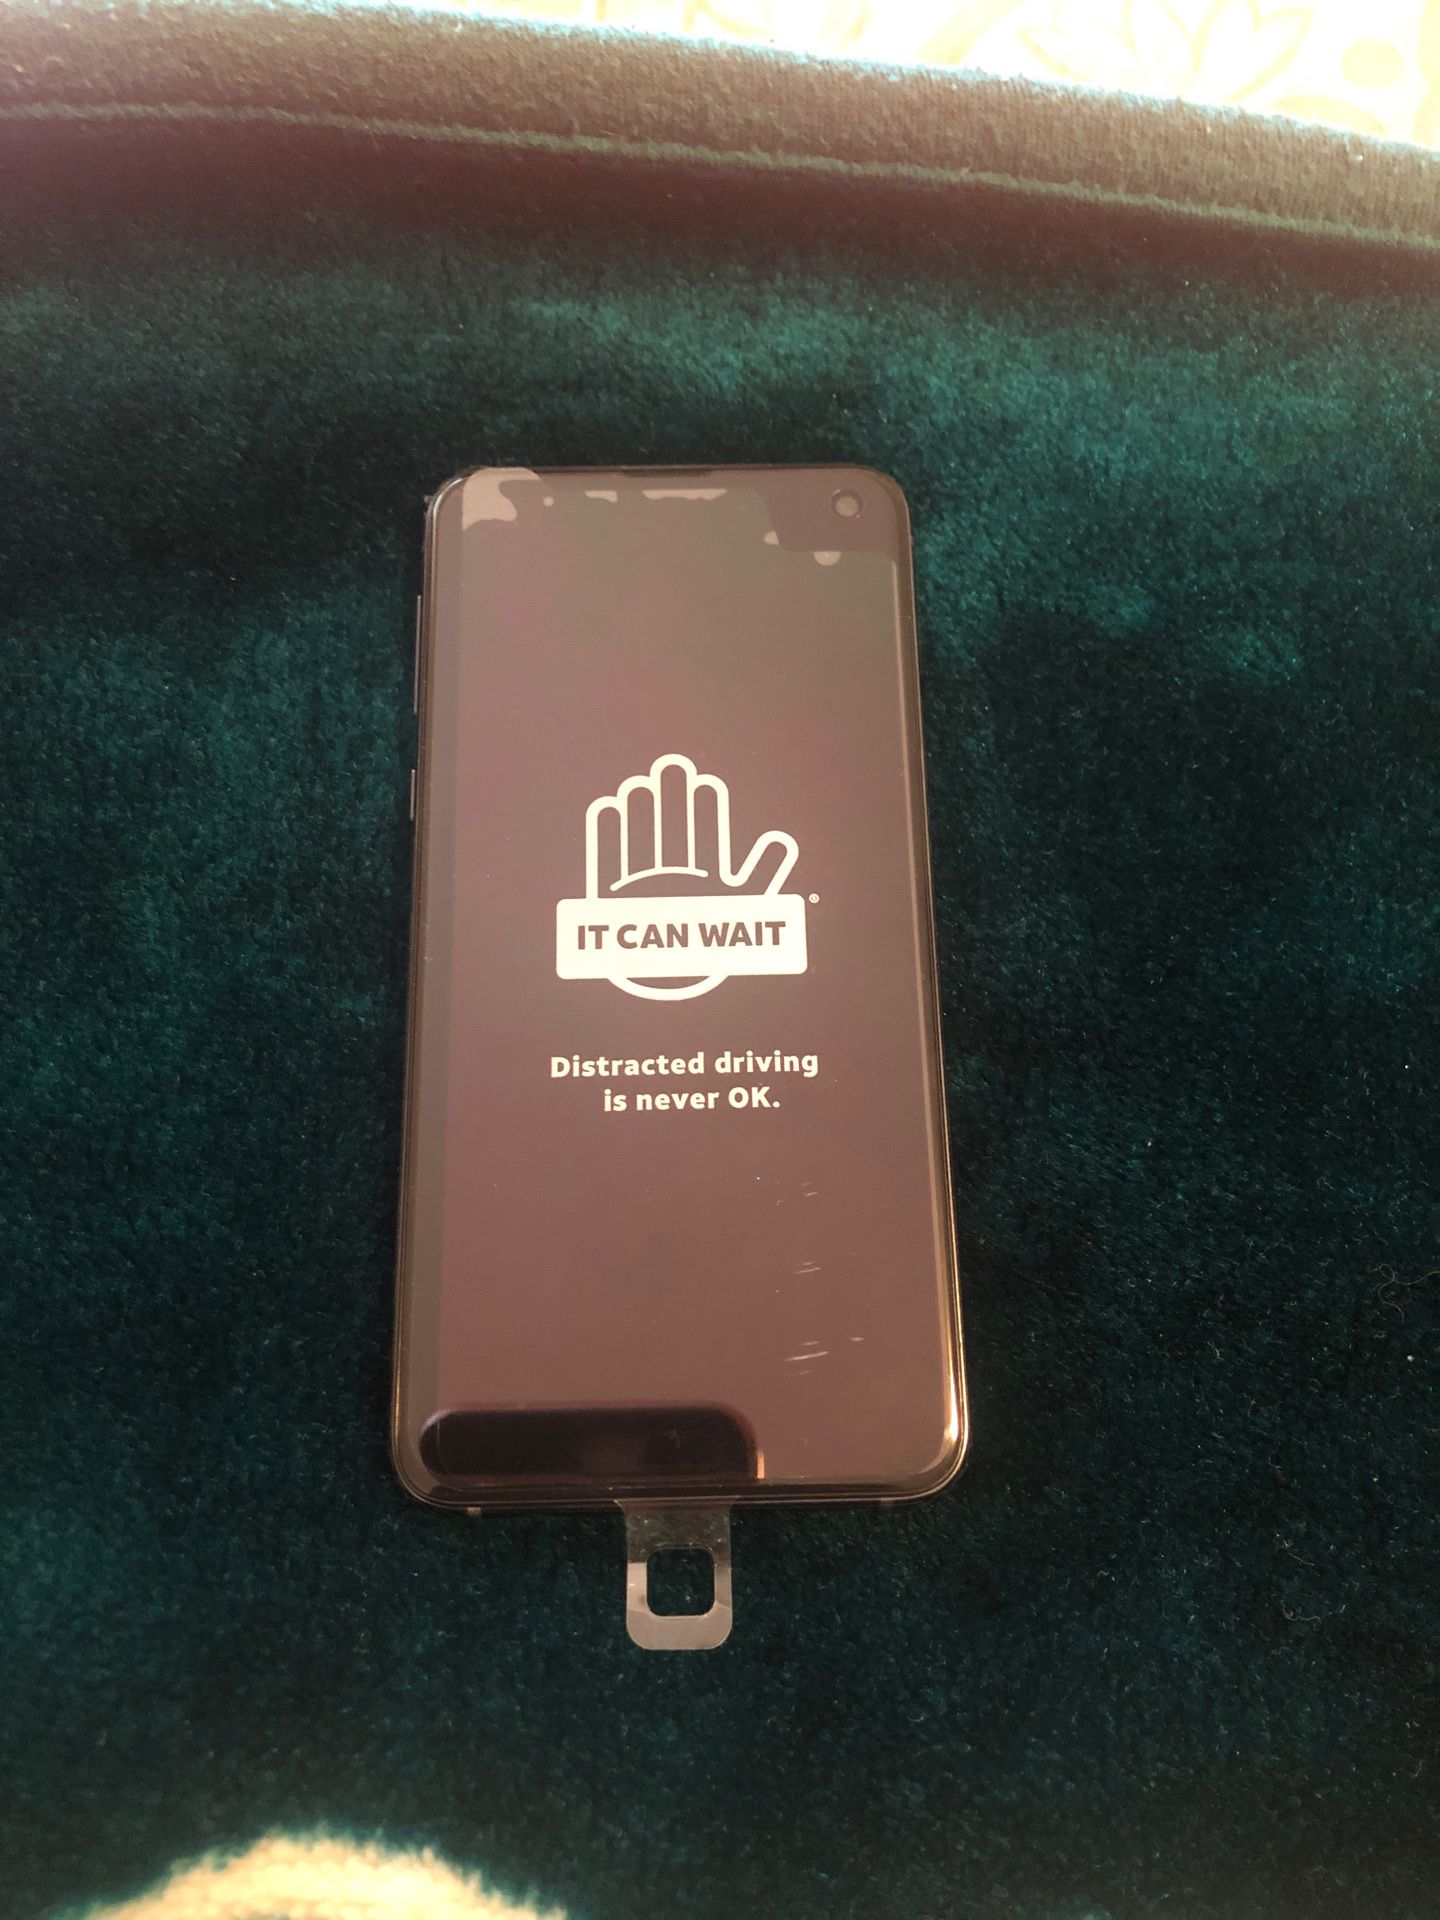 Samsung Galaxy S10e AT&T Carrier